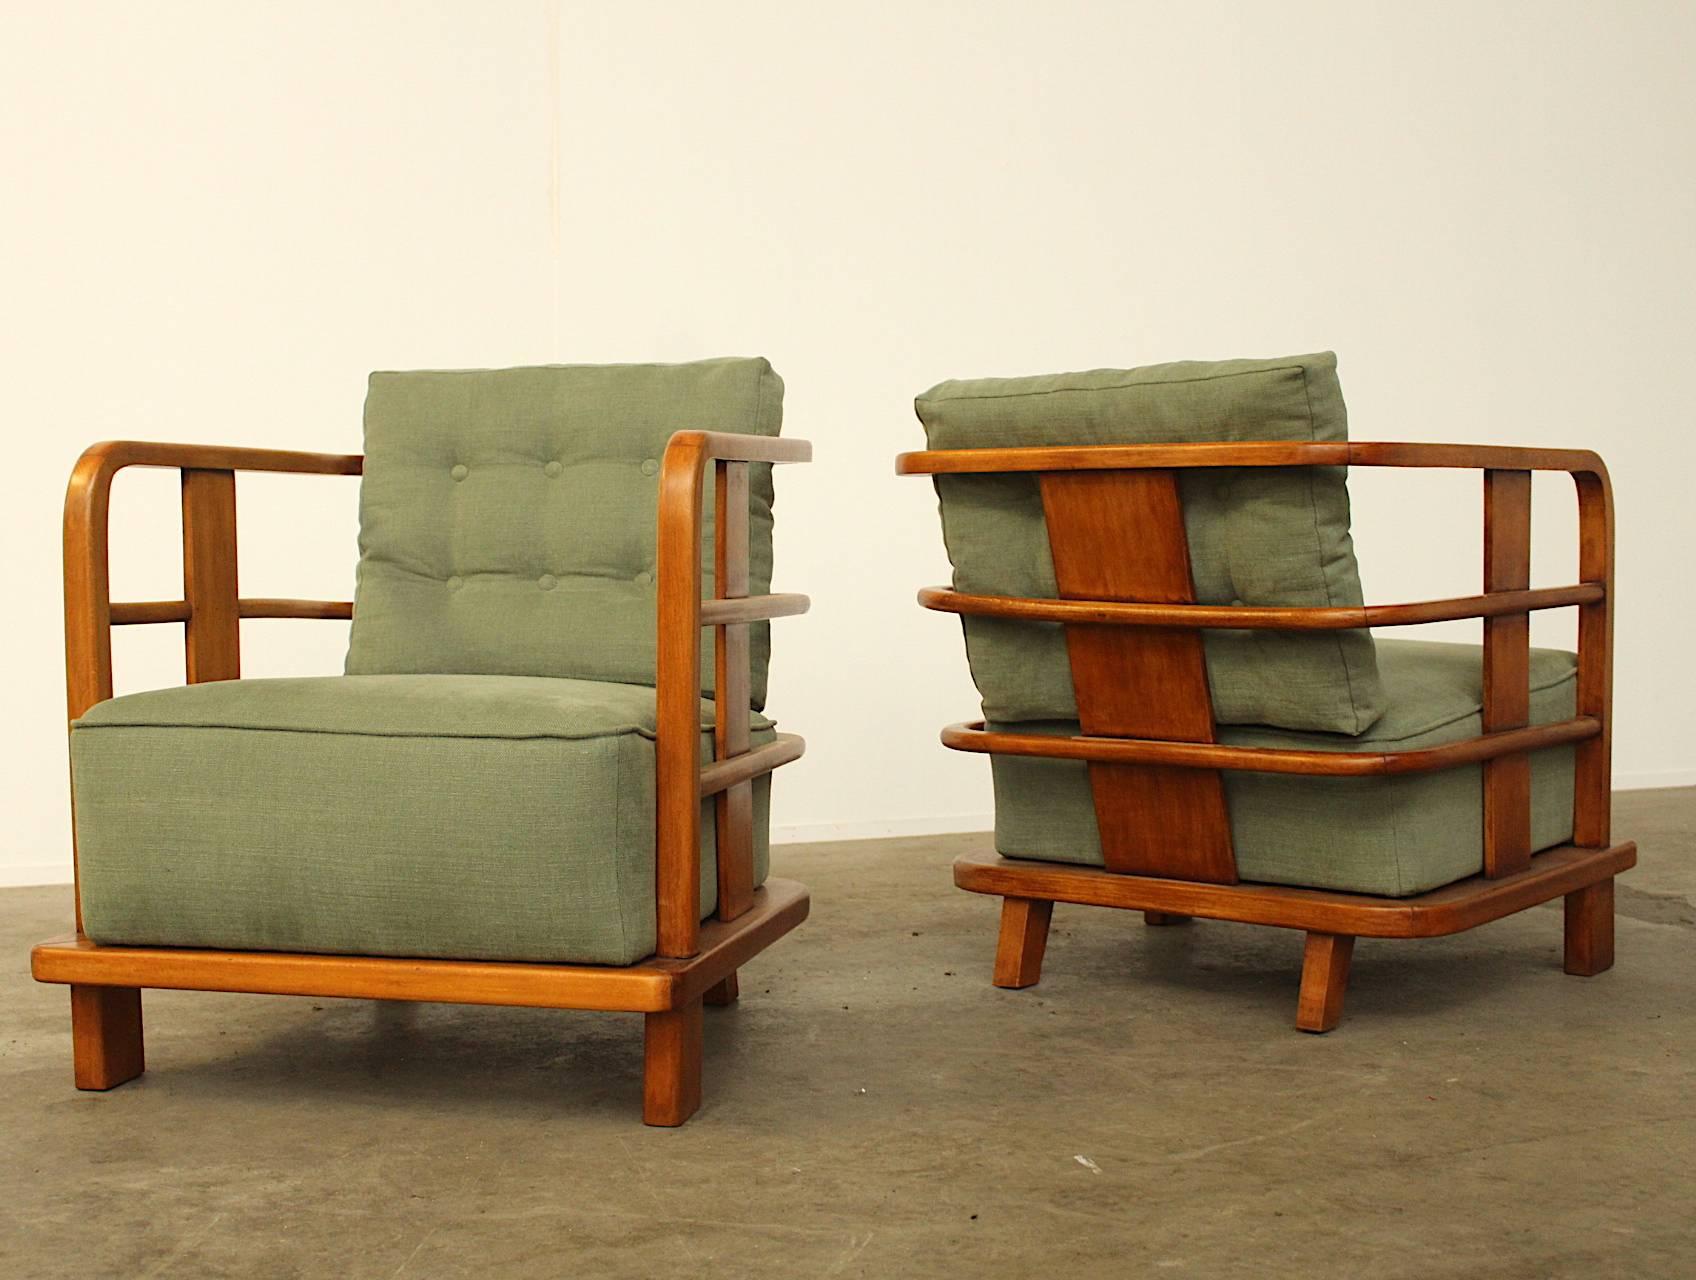 Mid-20th Century Pair of Arm Chairs Easy Chairs, attributed to Jean Royere, France mid 1940's